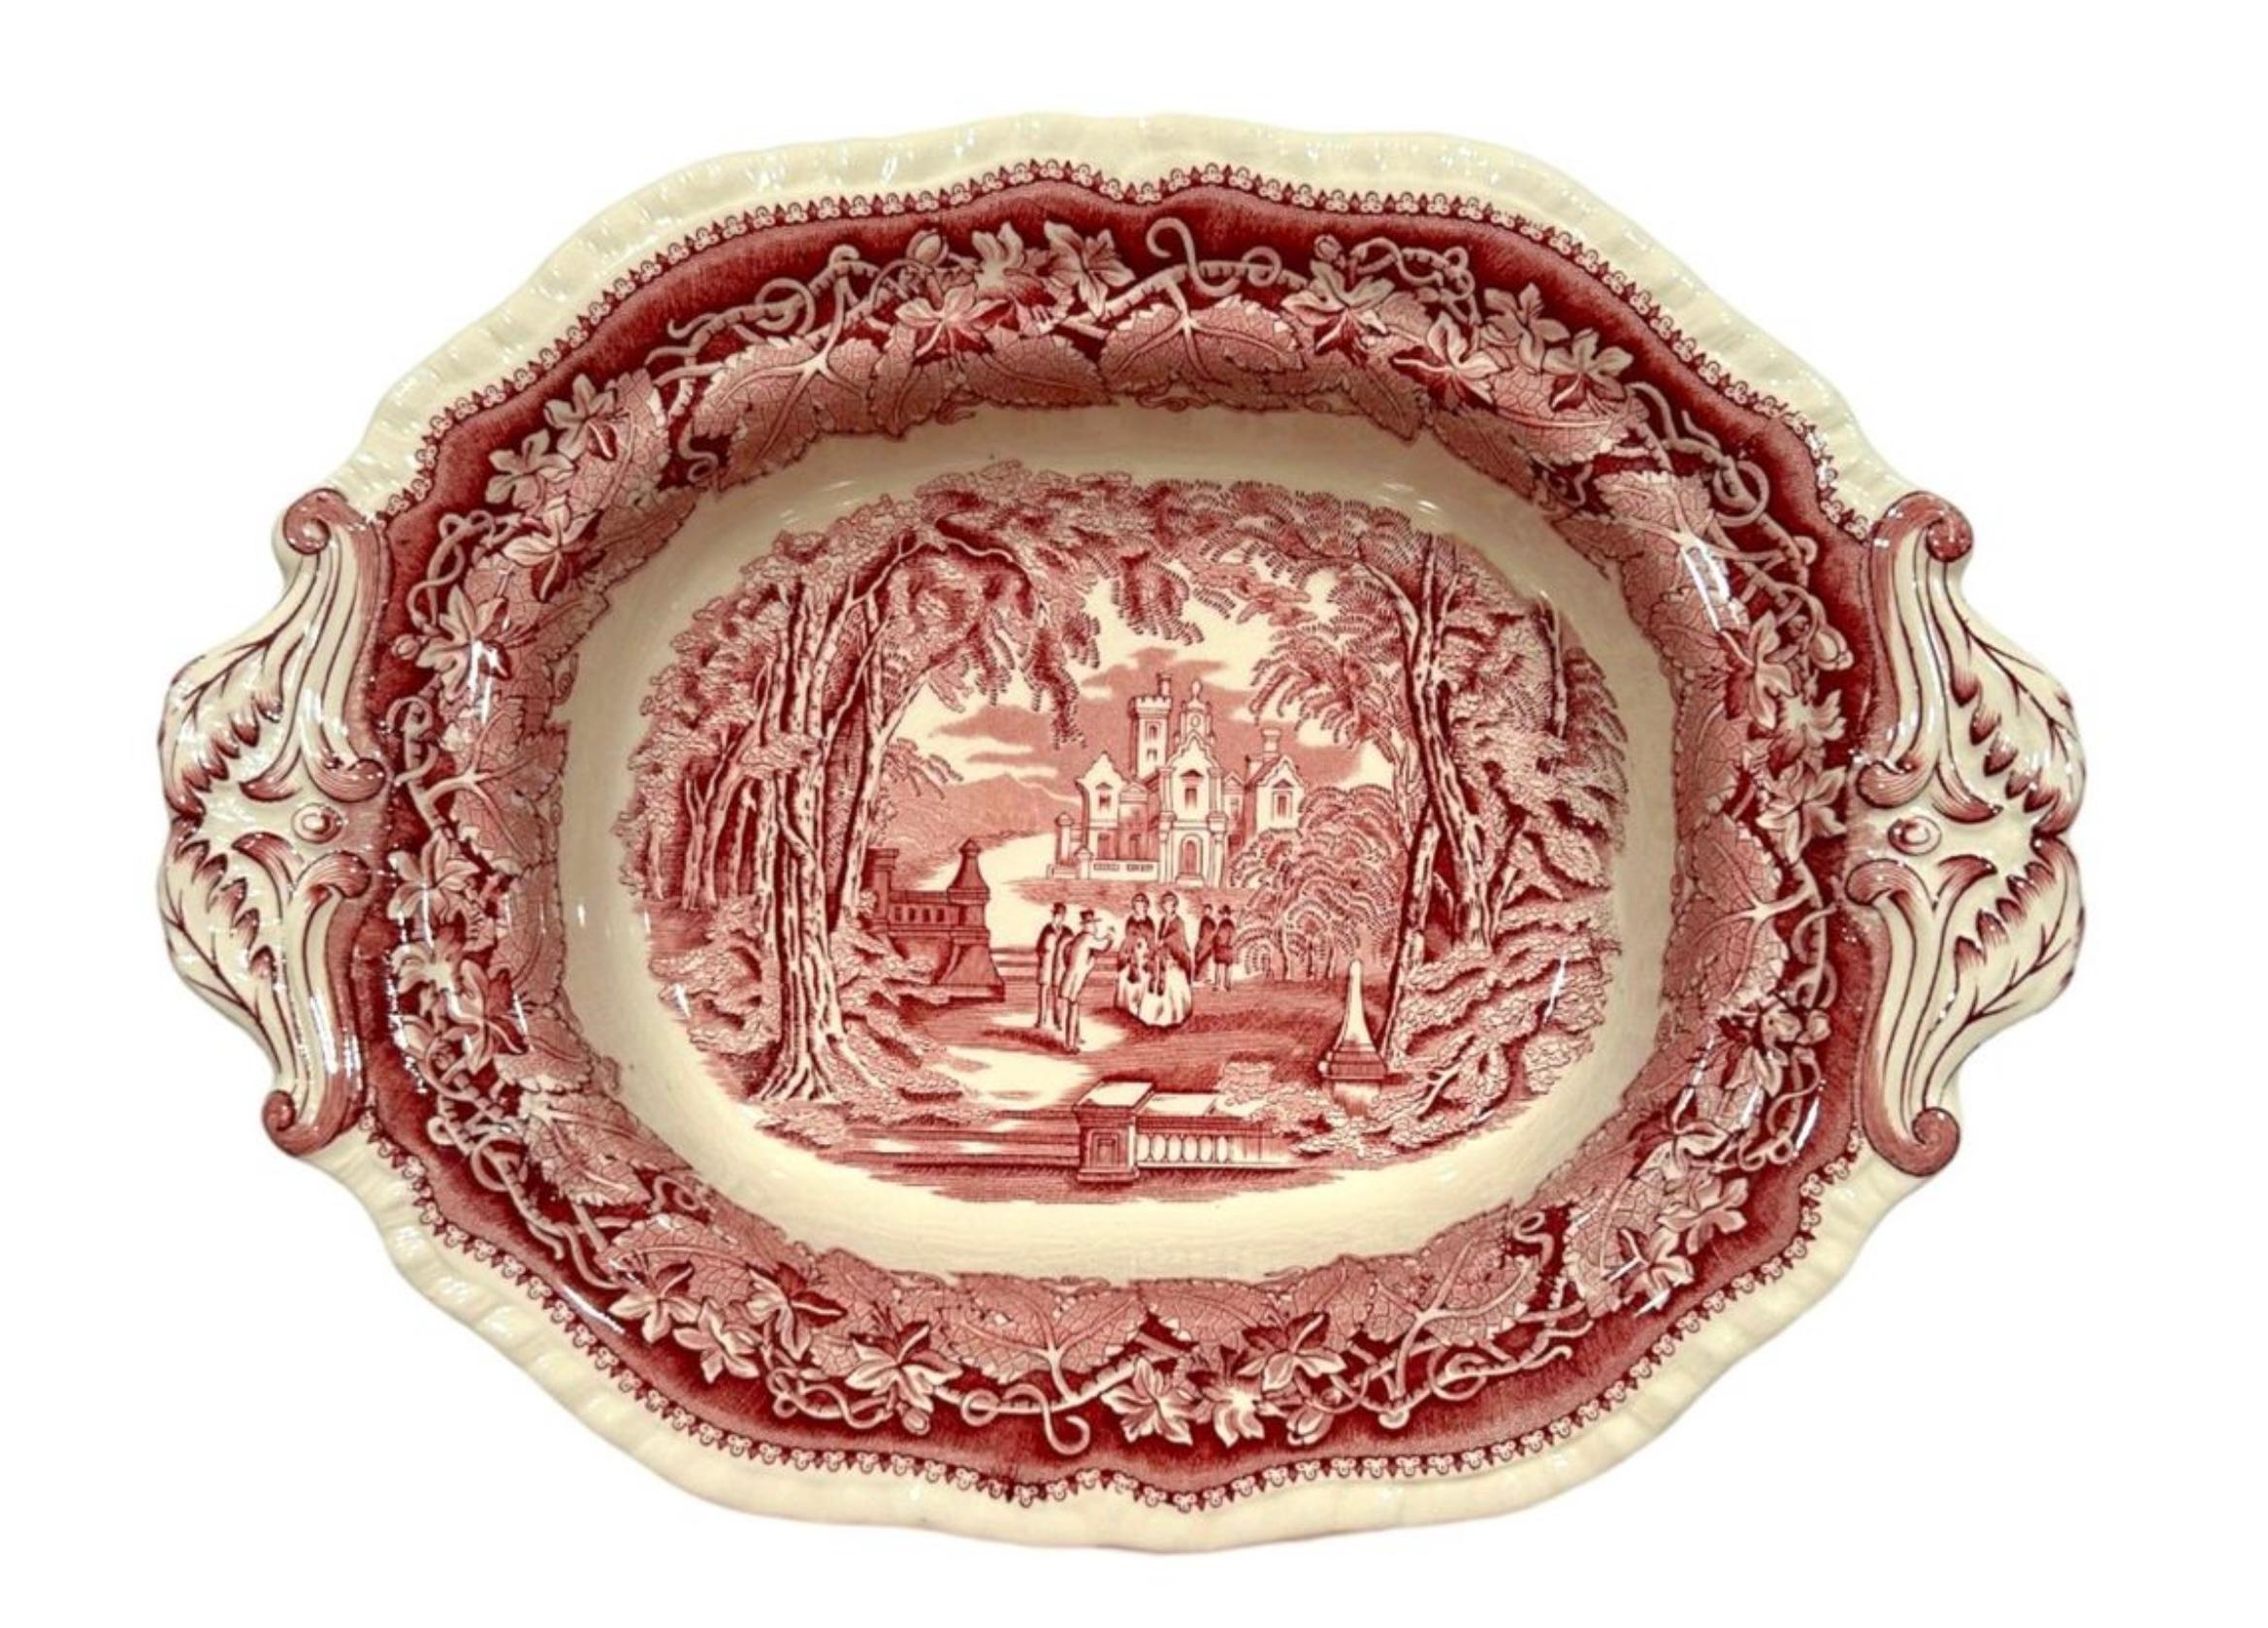 Vintage 1950’s Mason’s Red “Vista” Ironstone Transferware Serving Bowl w/ Lid In Good Condition For Sale In Naples, FL